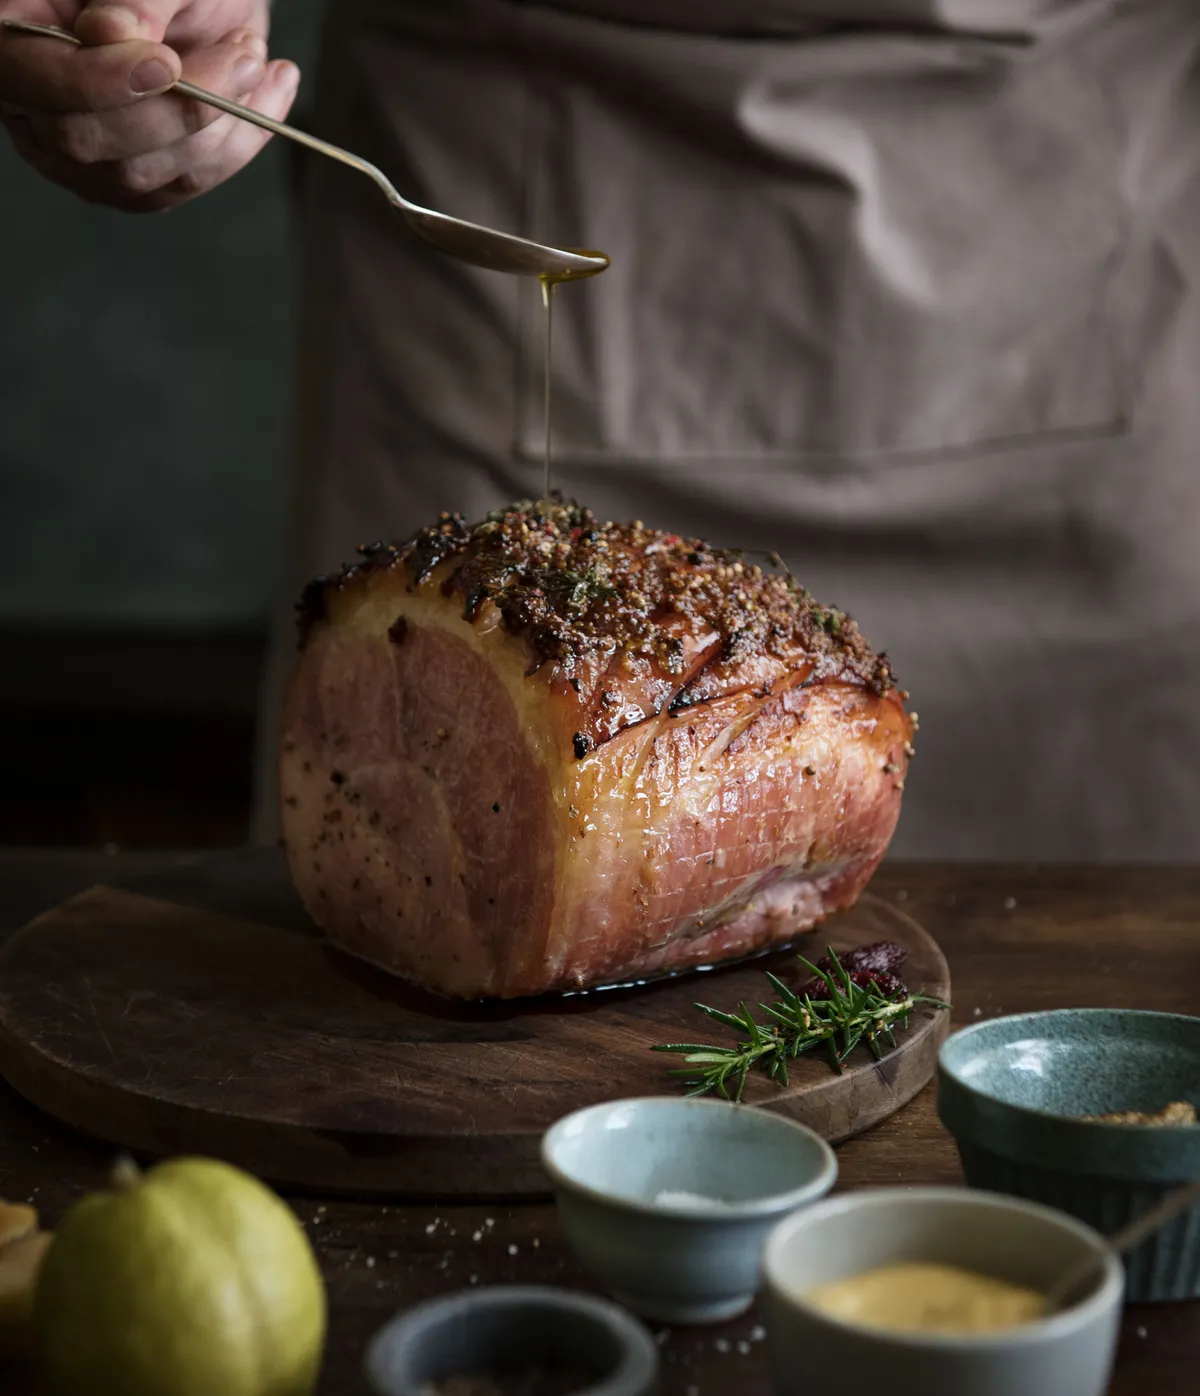 Home cured Christmas gammon recipe (Photo by: Rawpixel via Getty Images)